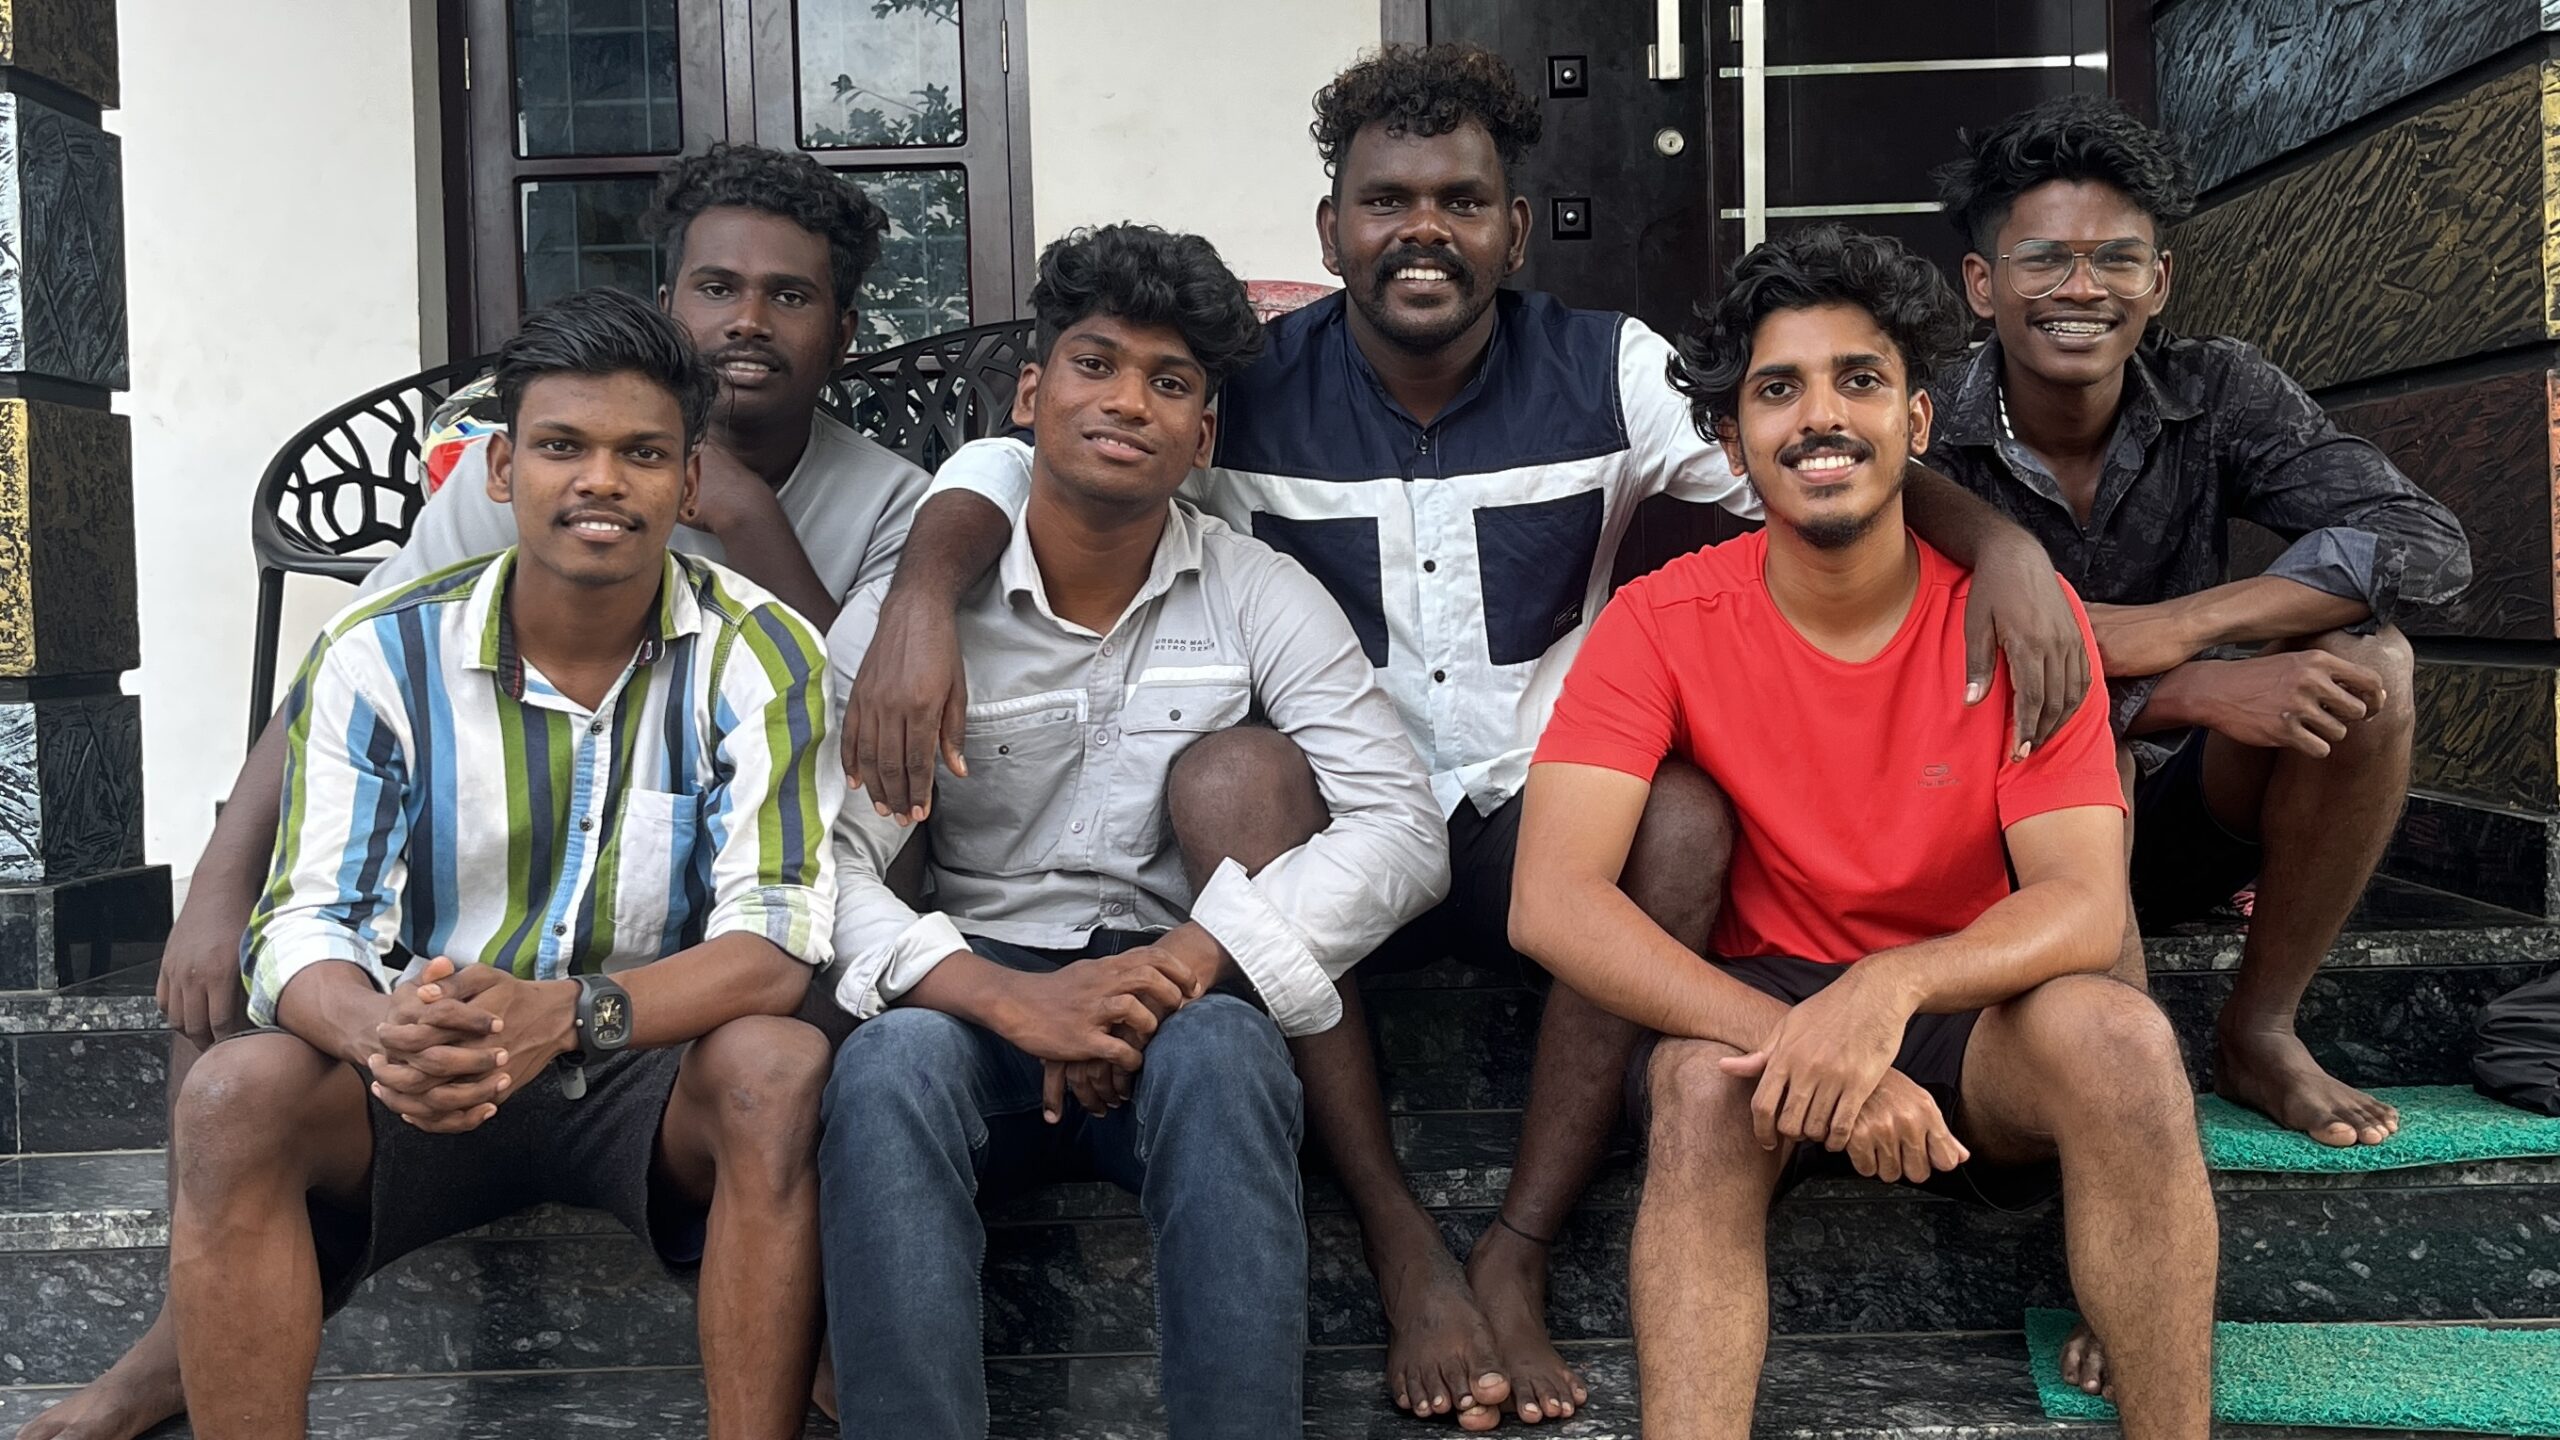 Instagrammer Sarath EB and his friends. (Supplied)